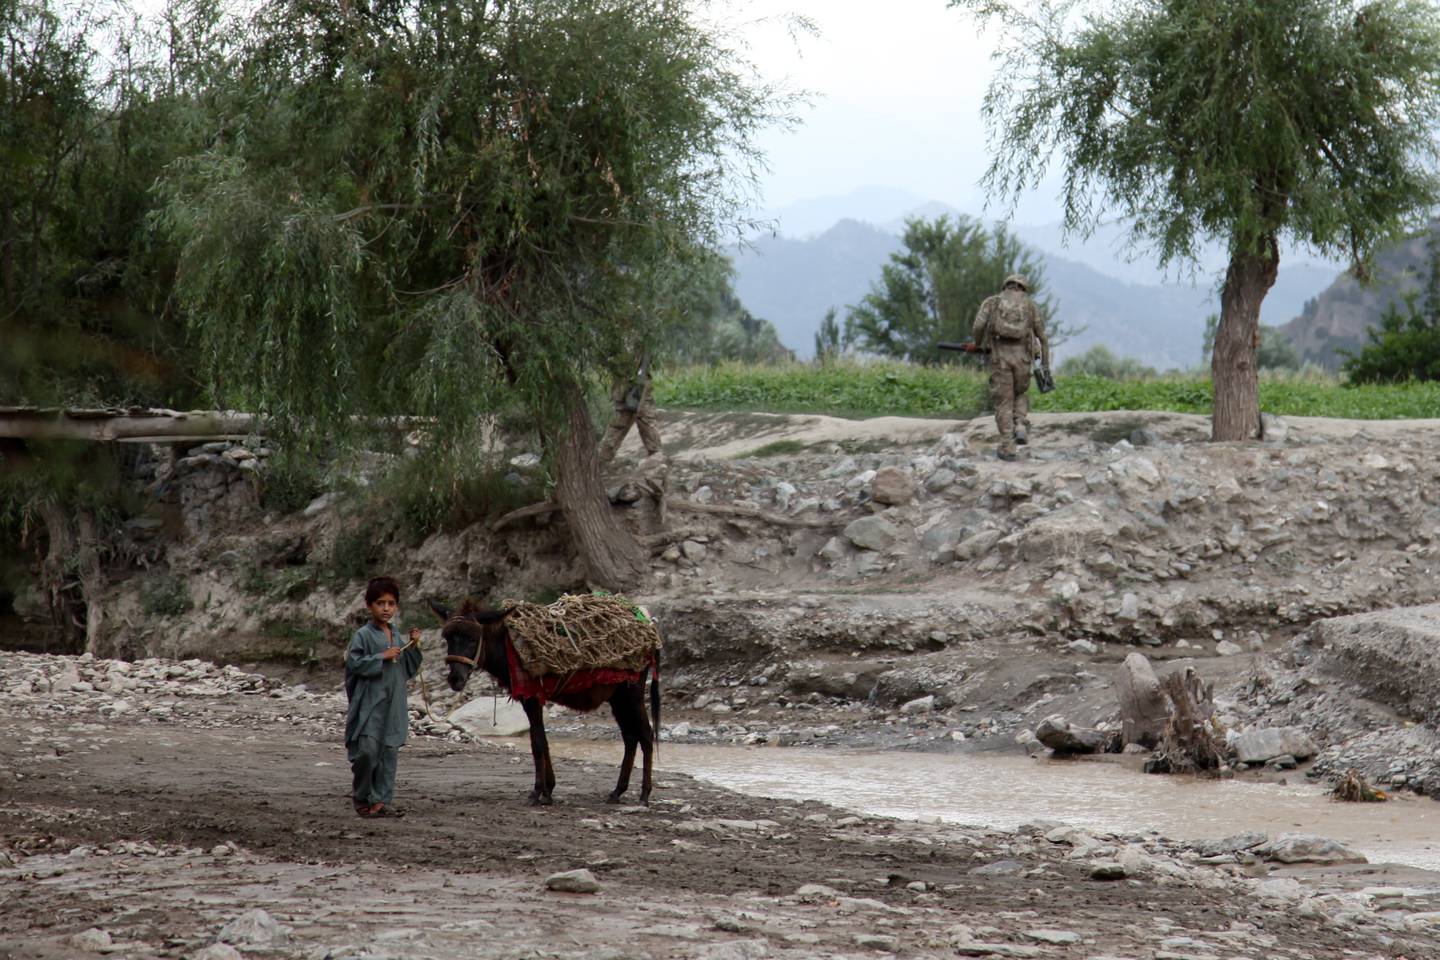 A little boy leads his donkey by a creek while a U.S. Soldier with 3rd Platoon, Able Company, 3rd Battalion (Airborne), 509th Infantry Regiment, Task Force 4-25, walks toward the bridge during a patrol in Sarengor Valley, Paktia province, Afghanistan, Aug. 23, 2012.